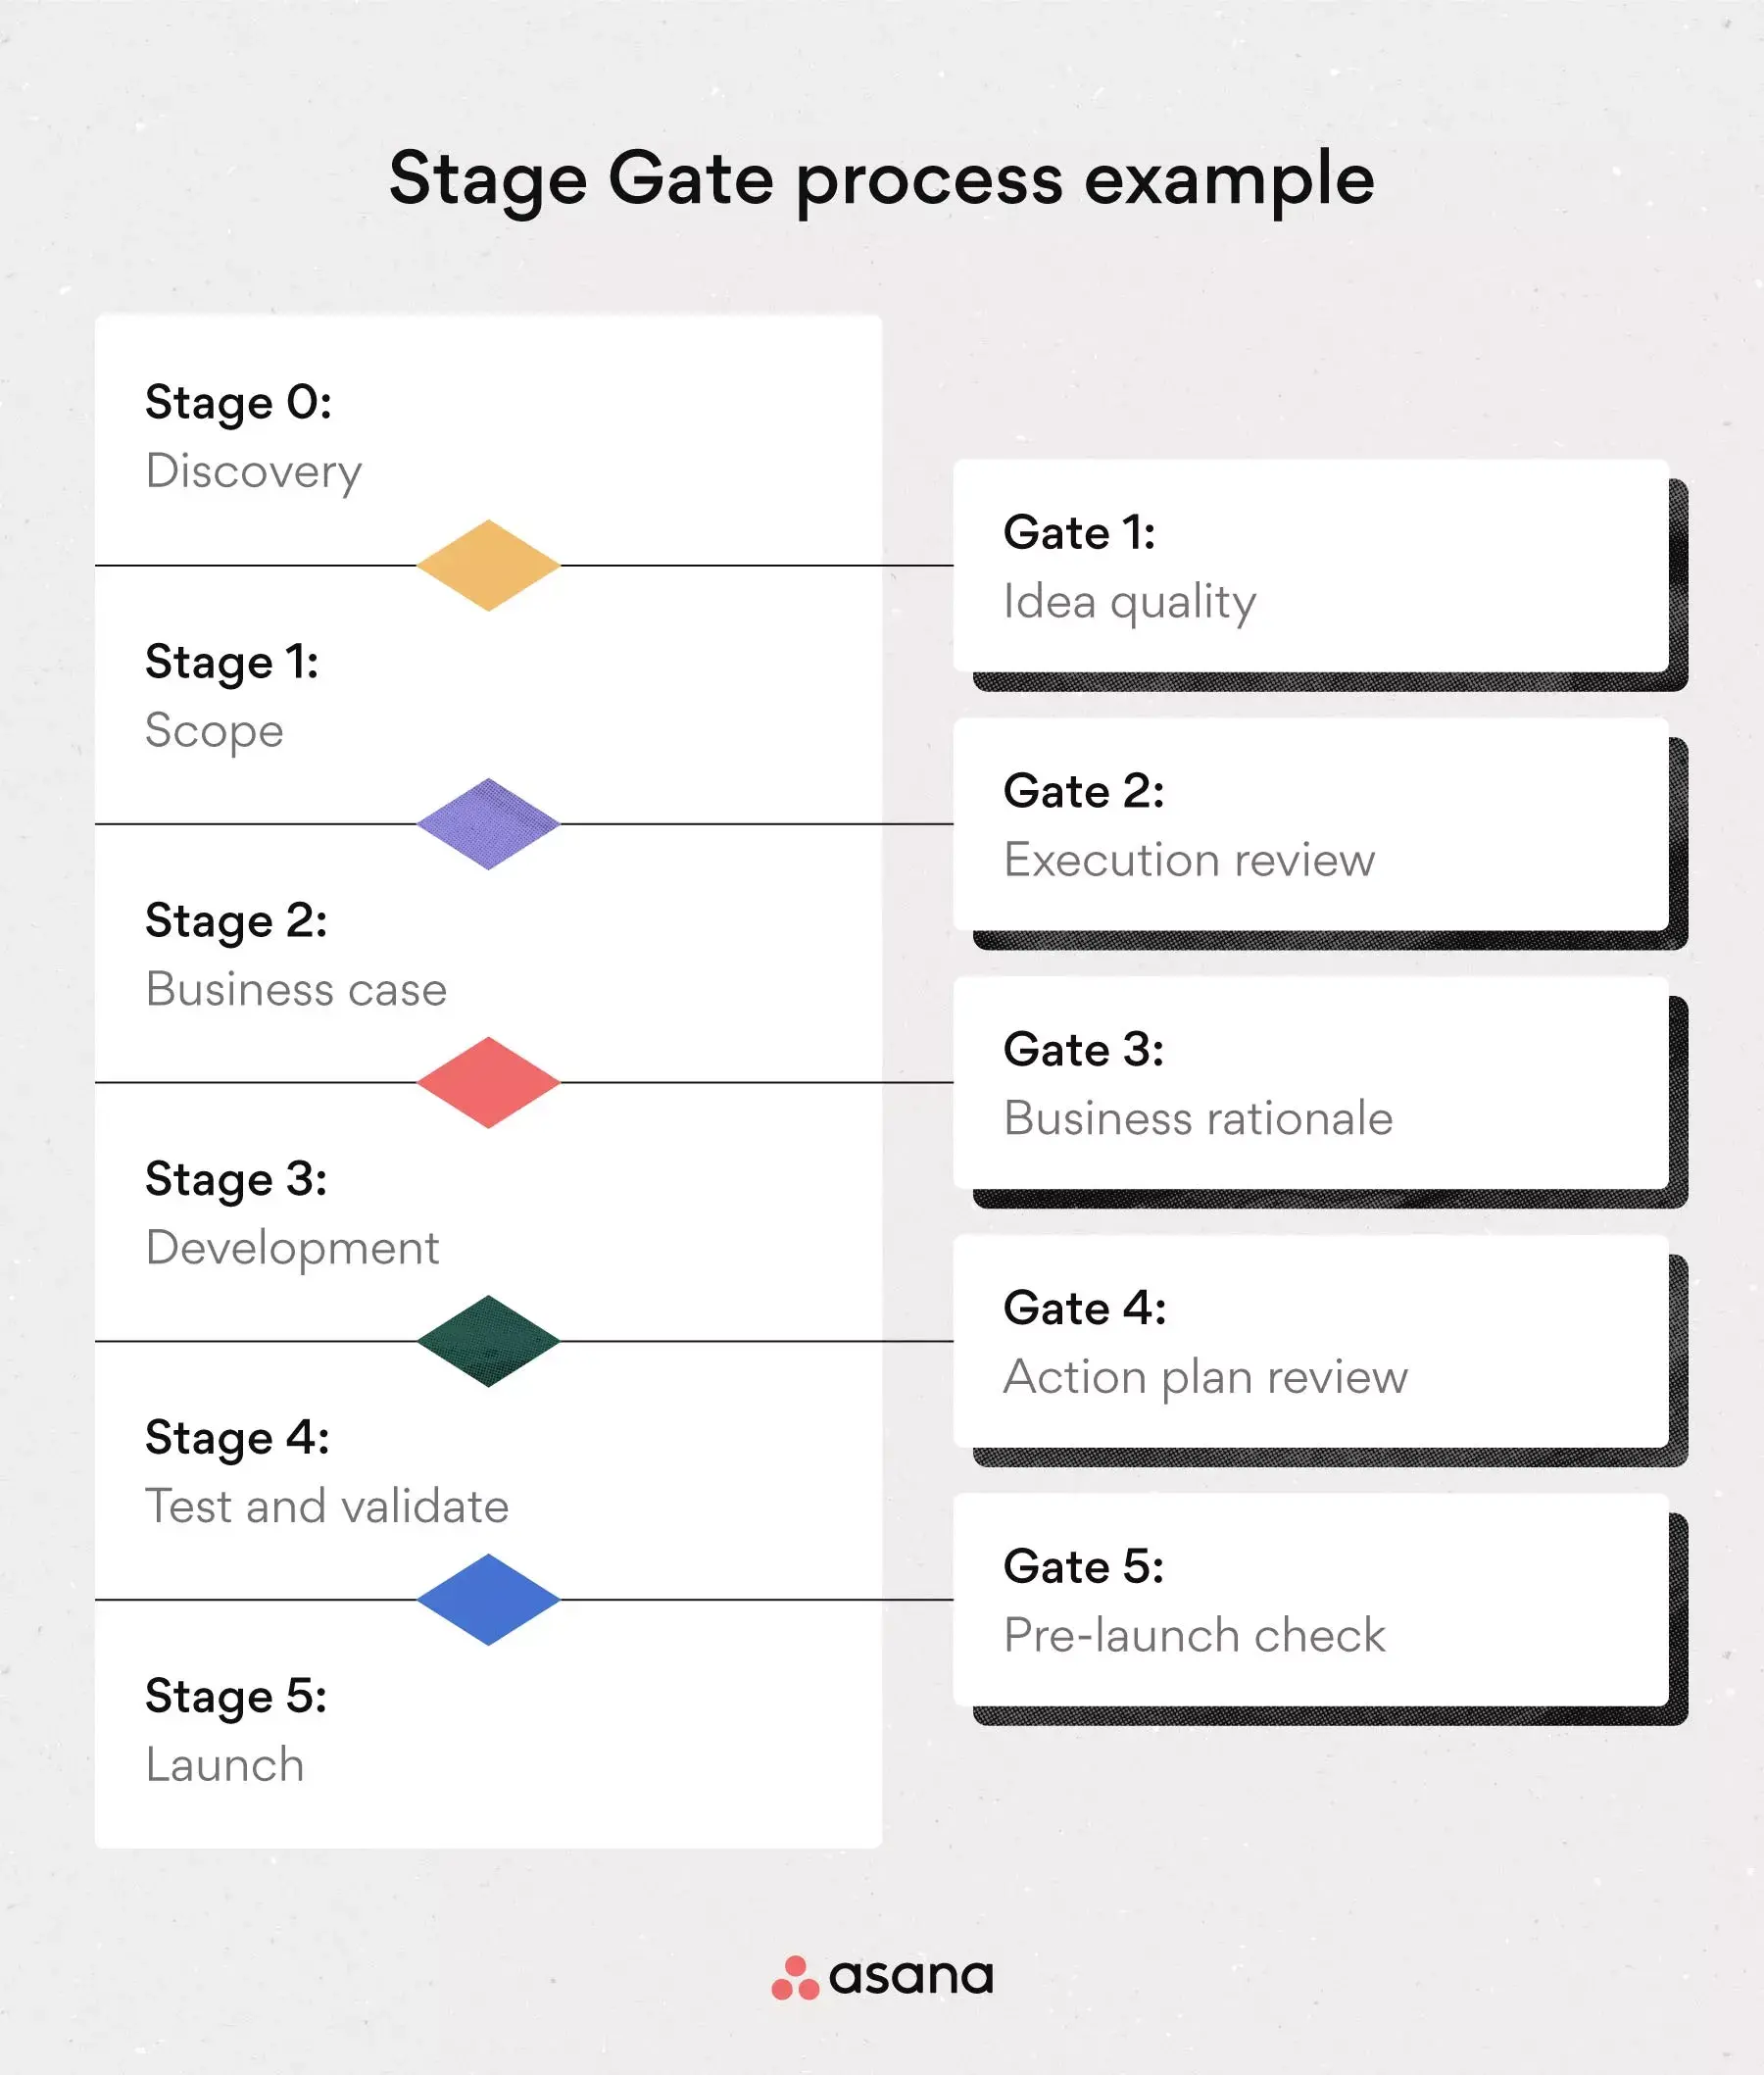 [inline illustration] Stage gate process (example)